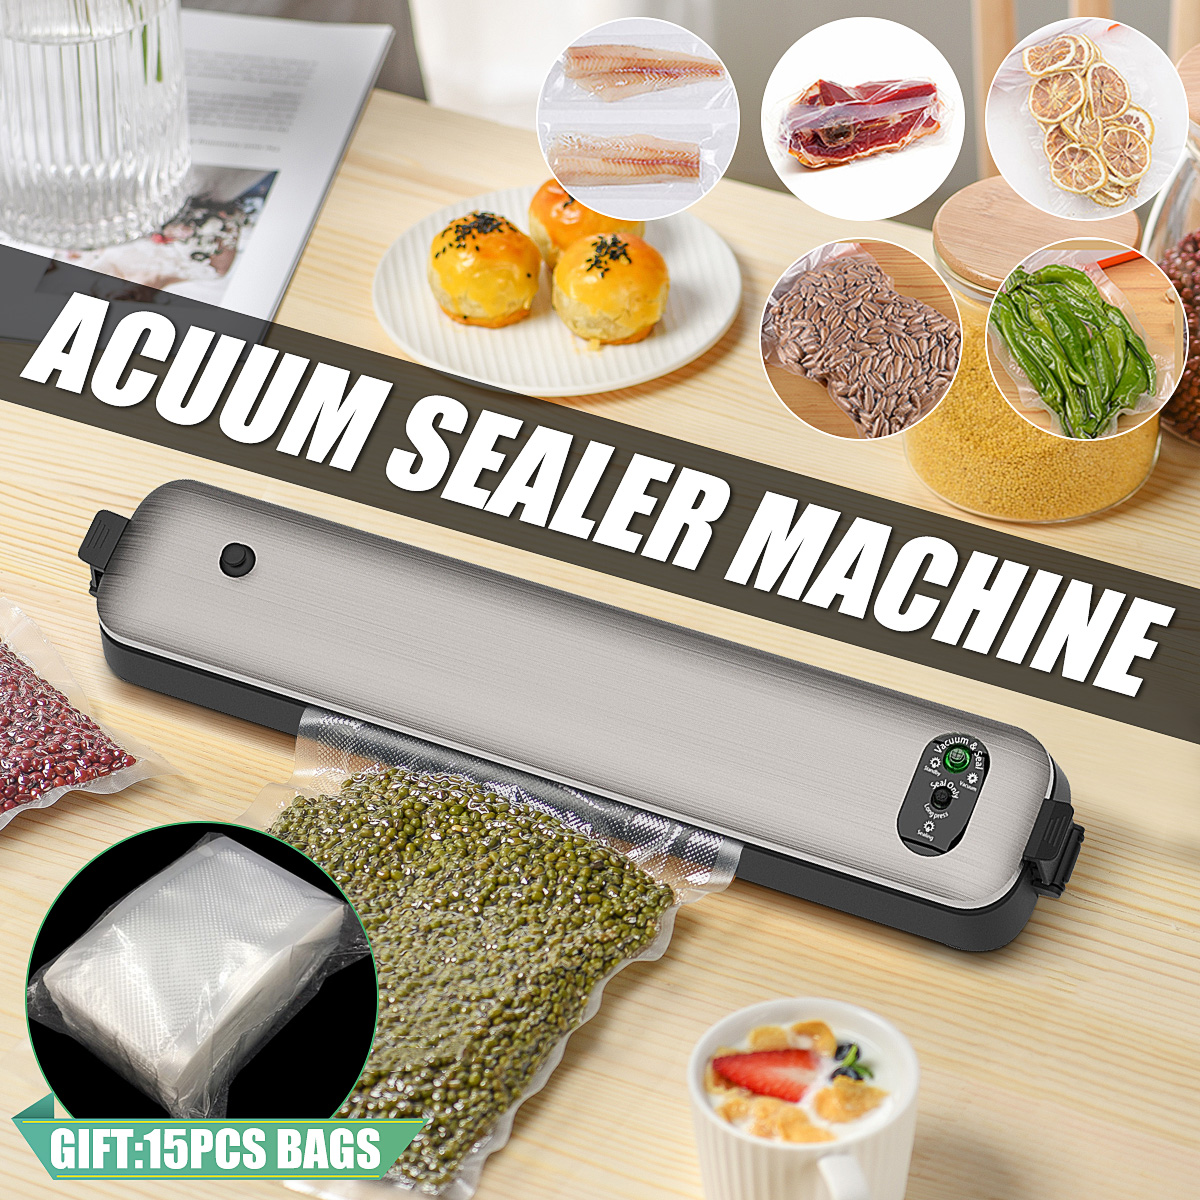 Household-Vacuum-Sealer-Machine-Seal-Meal-Food-Vacuum-Sealer-System-with-15-Free-Bags-One-Touch-Cont-1938046-3